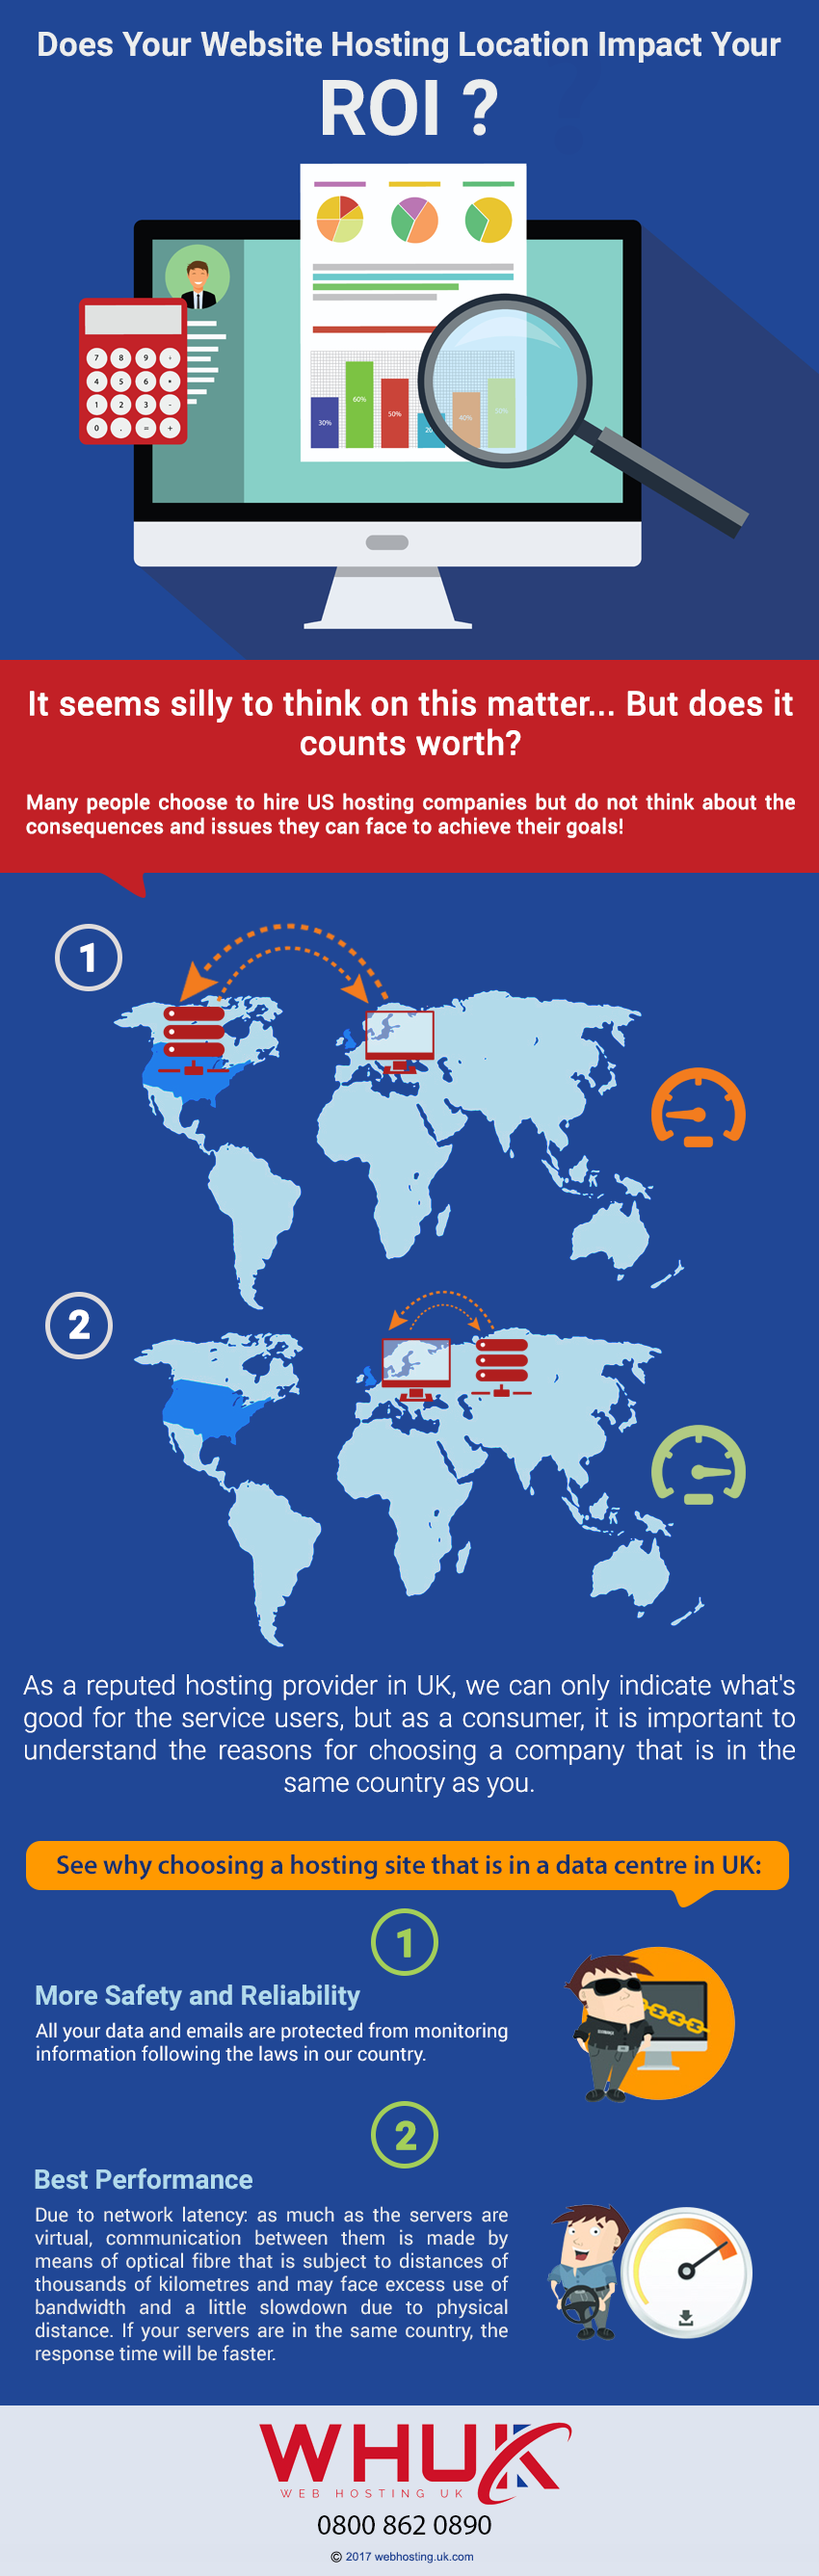 Does Your Website Hosting Location Impact Your ROI